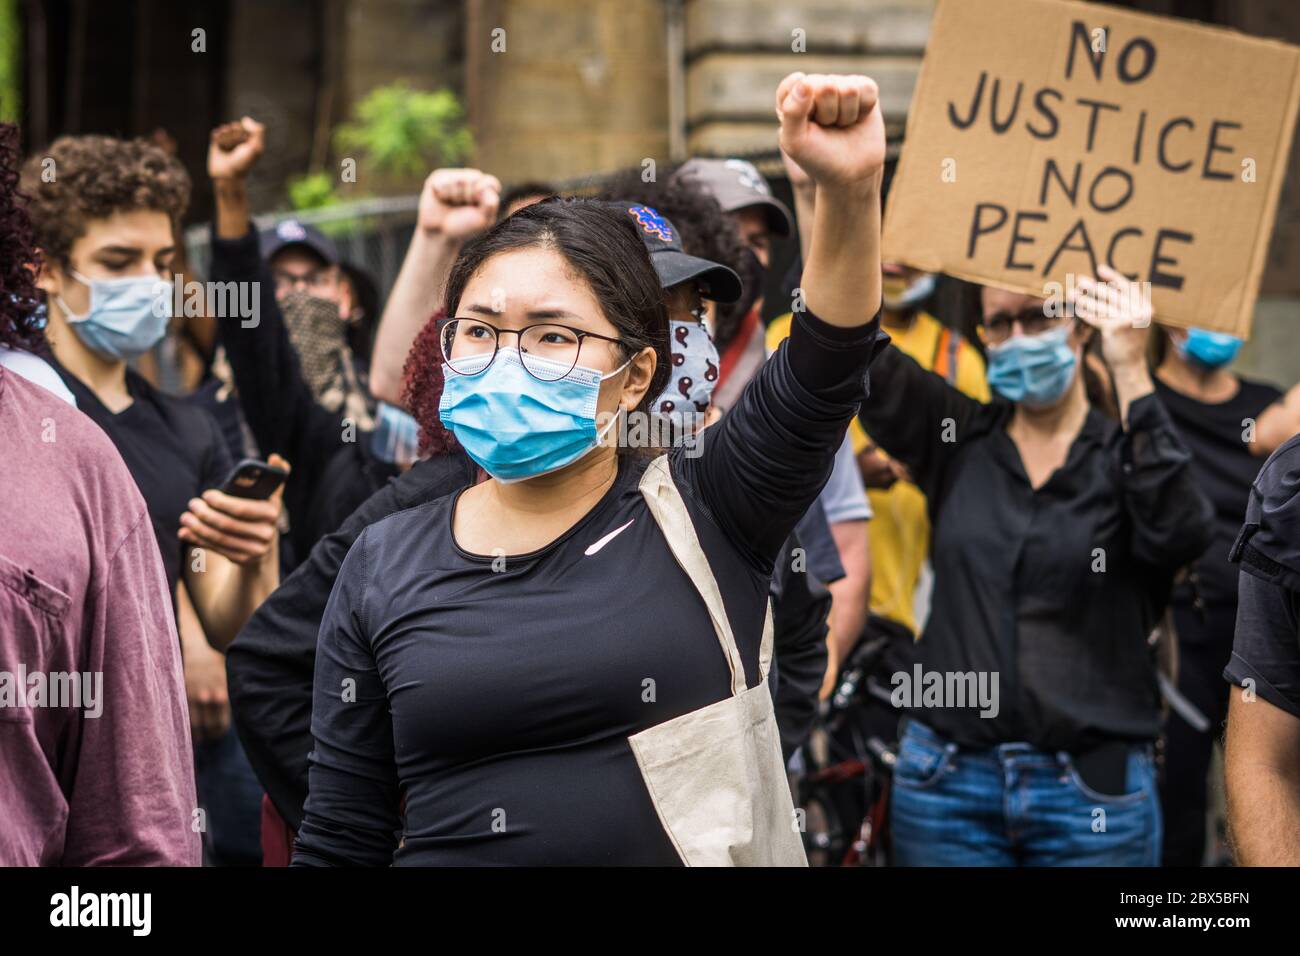 Black Lives Matter Protesters demanding racial justice and all police be held accountable for brutality and racial profiling. Stock Photo